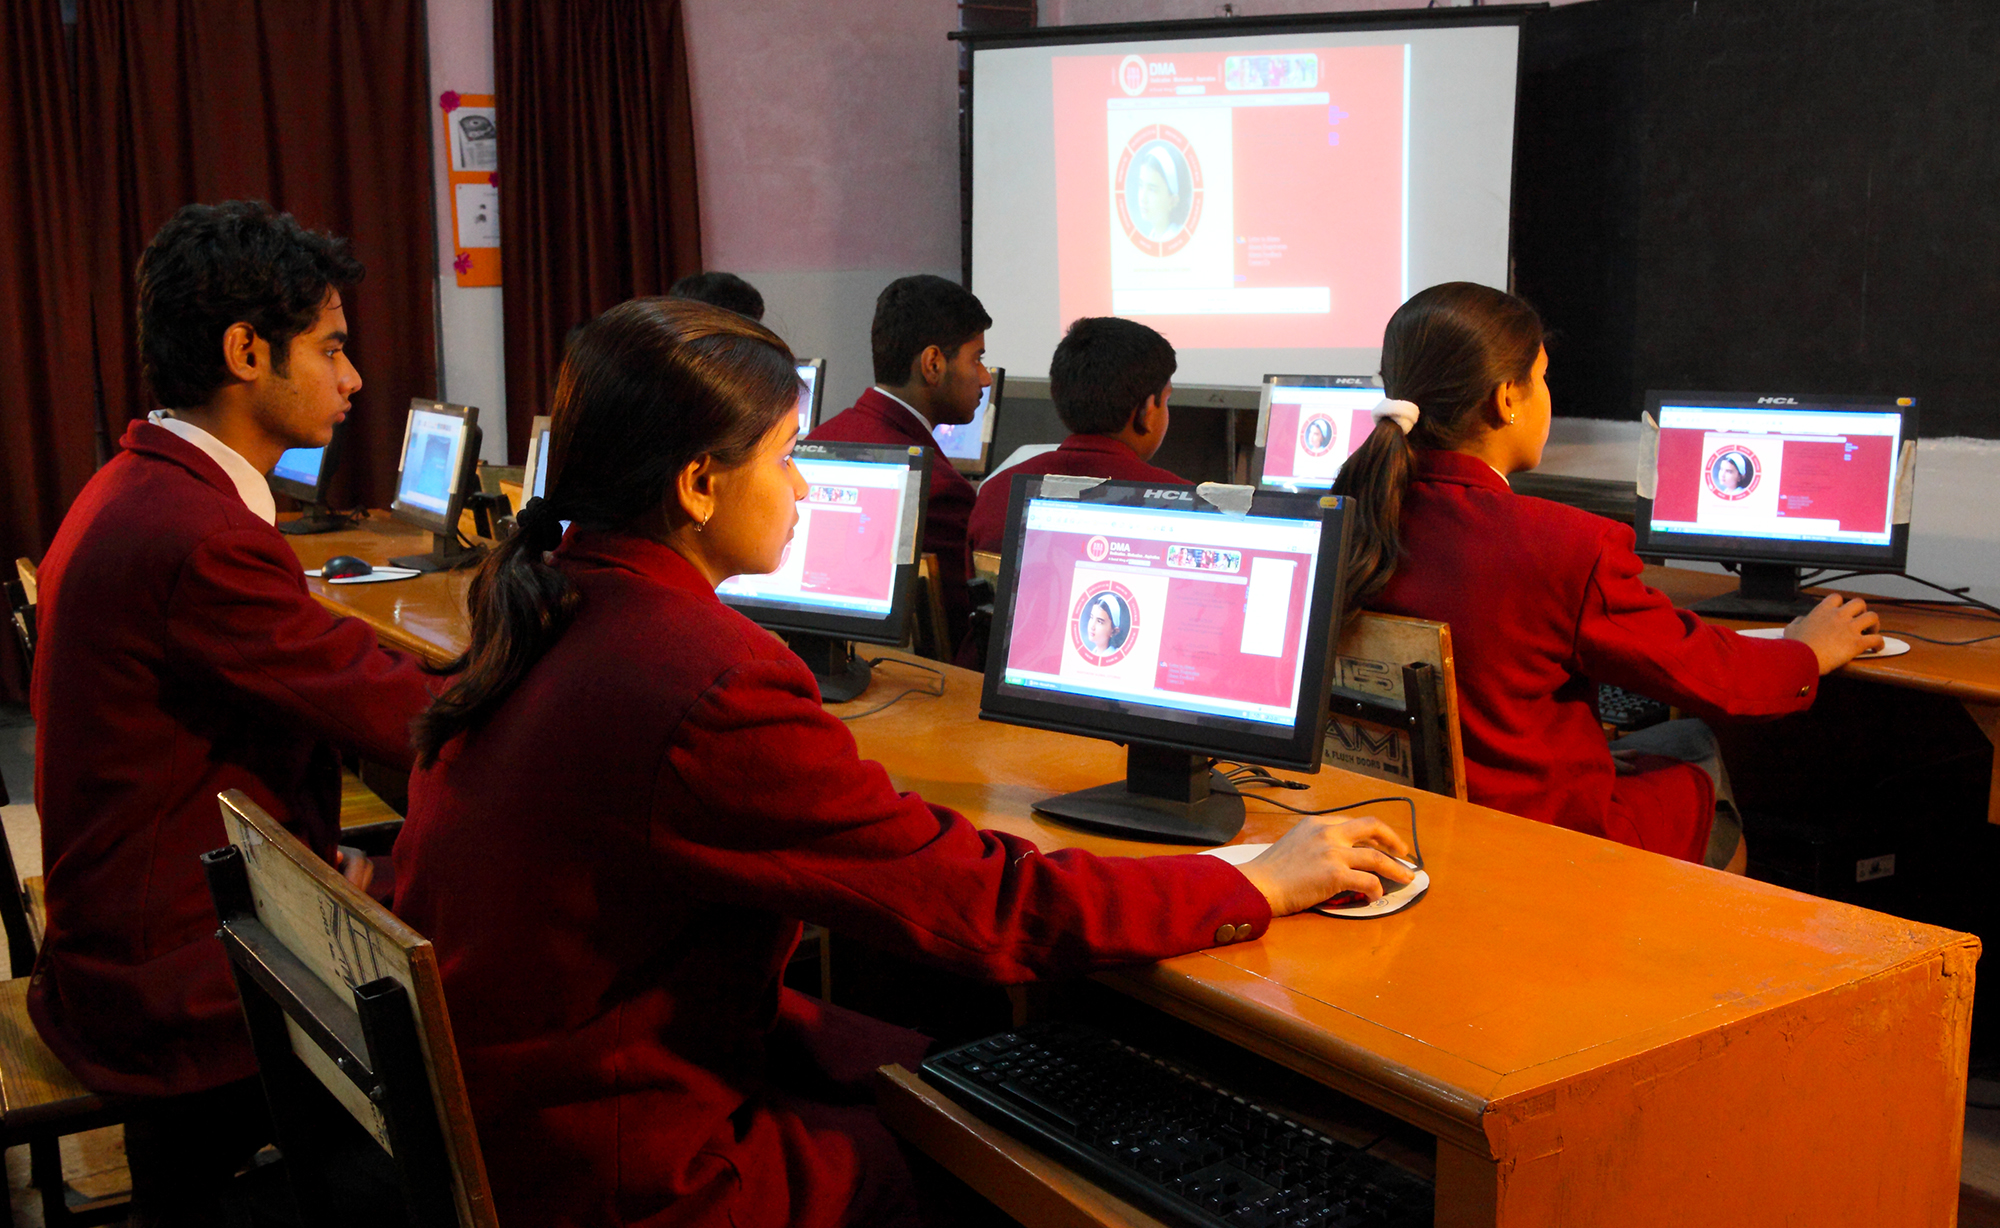 A technology enabled classroom in session at Modiciti IB